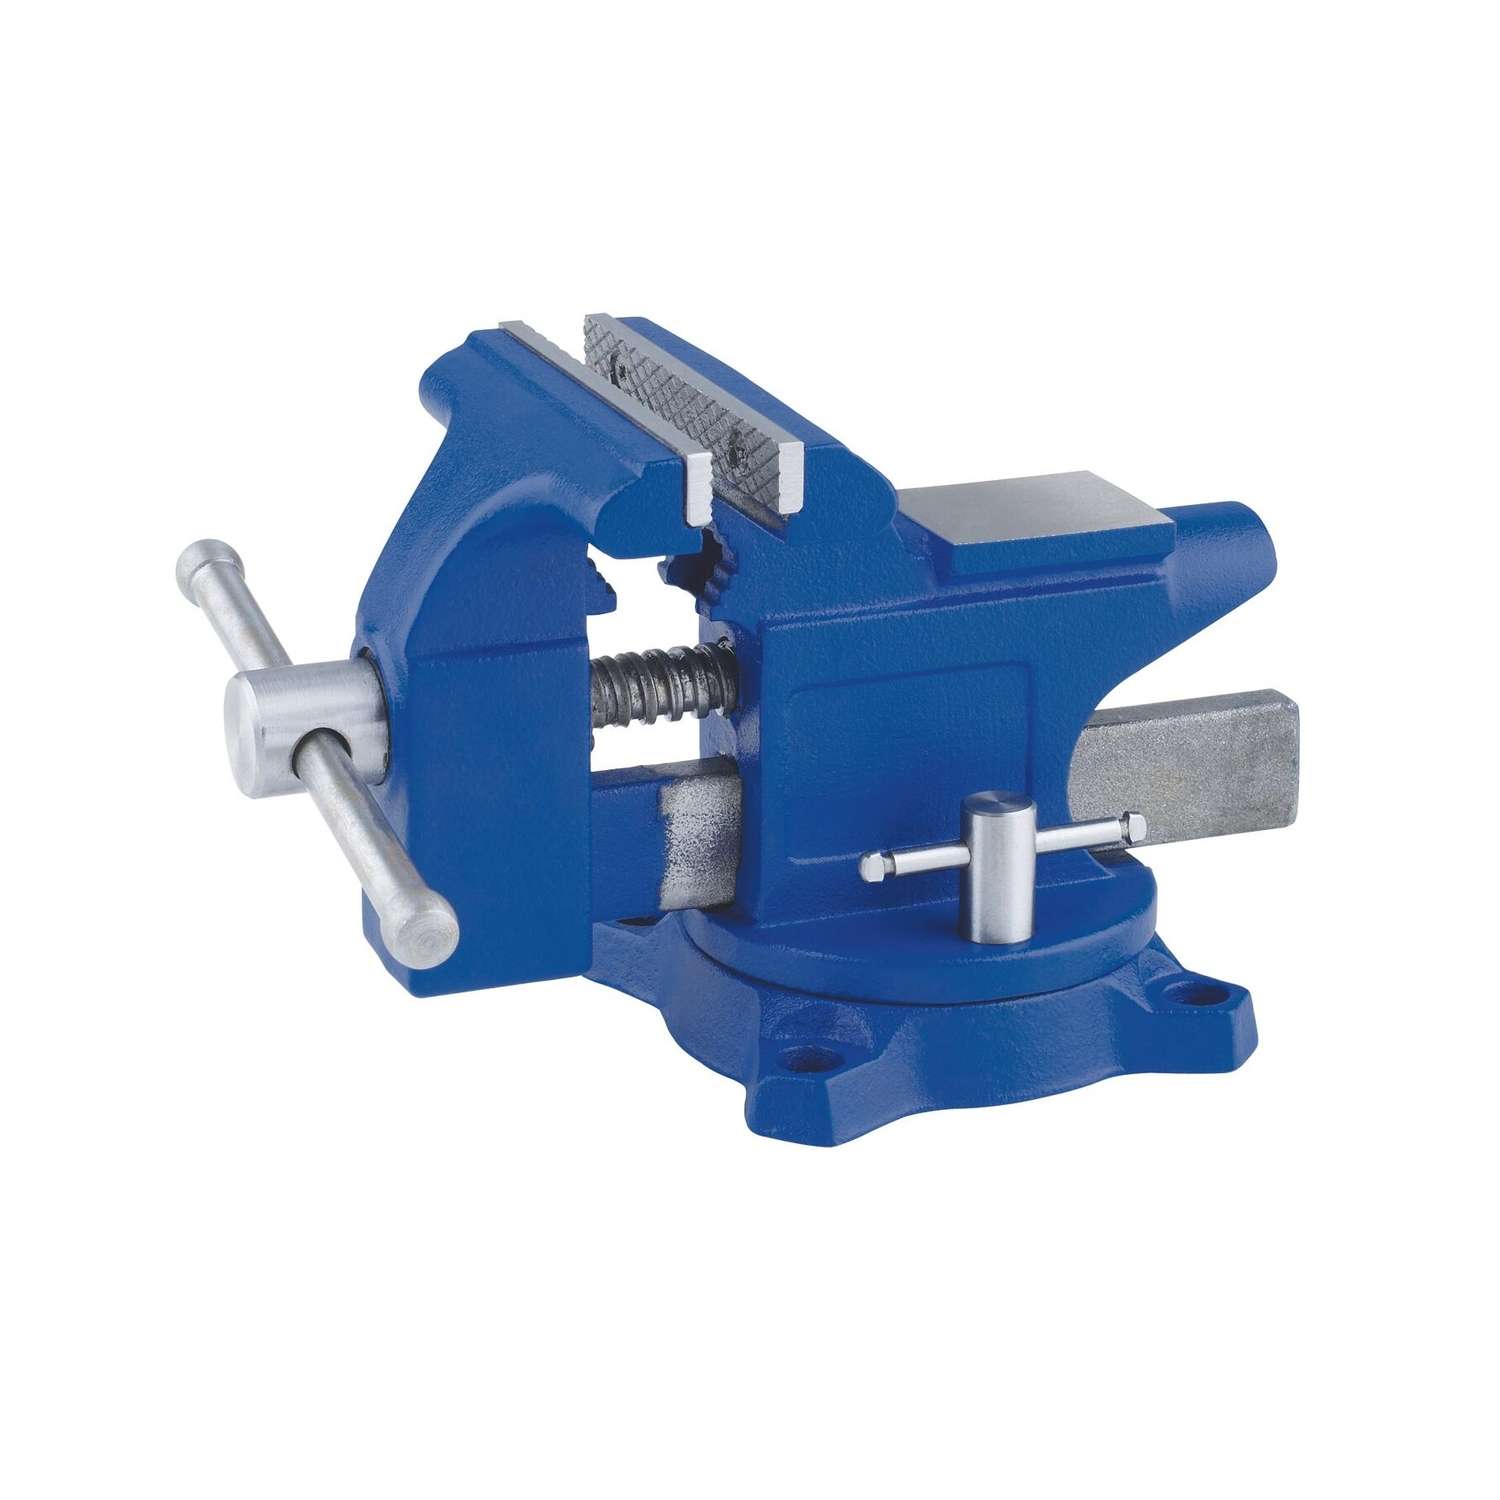 Details about   Stainless Steel High Precision 6" Wire Cut Bench Vise 